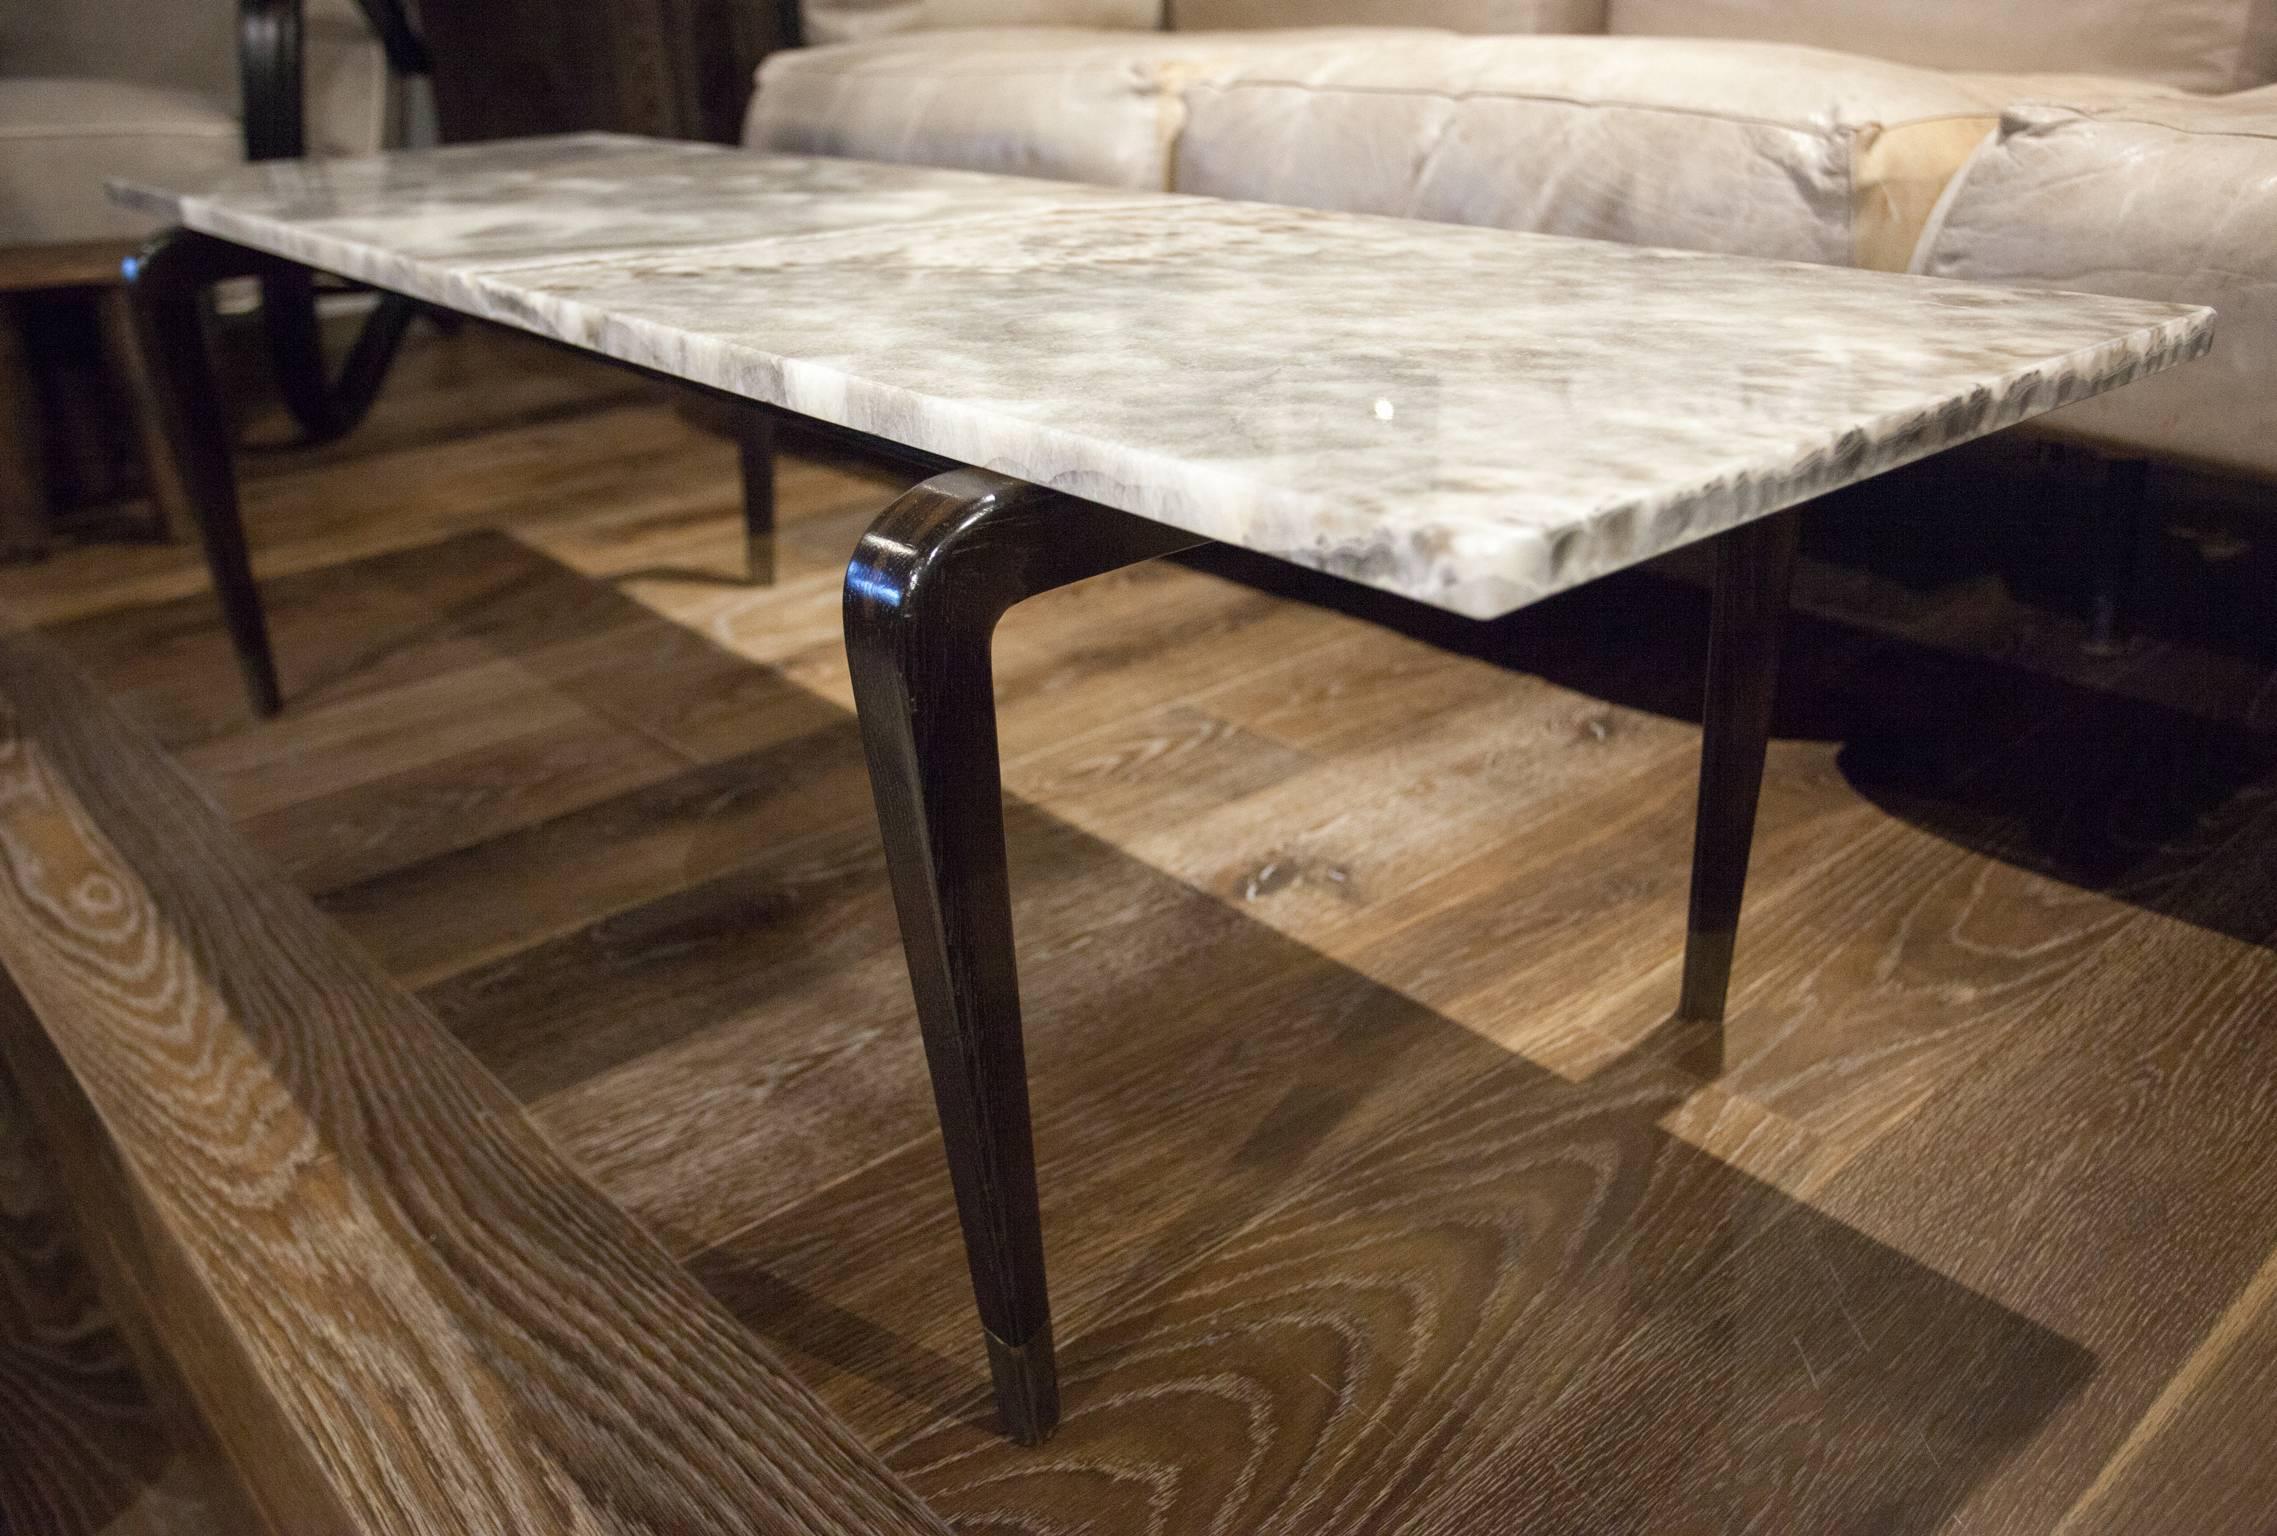 A custom coffee table with dark wood legs and a sleek onyx top, design by San Francisco designer Will Wick. Onyx top is removable.
 